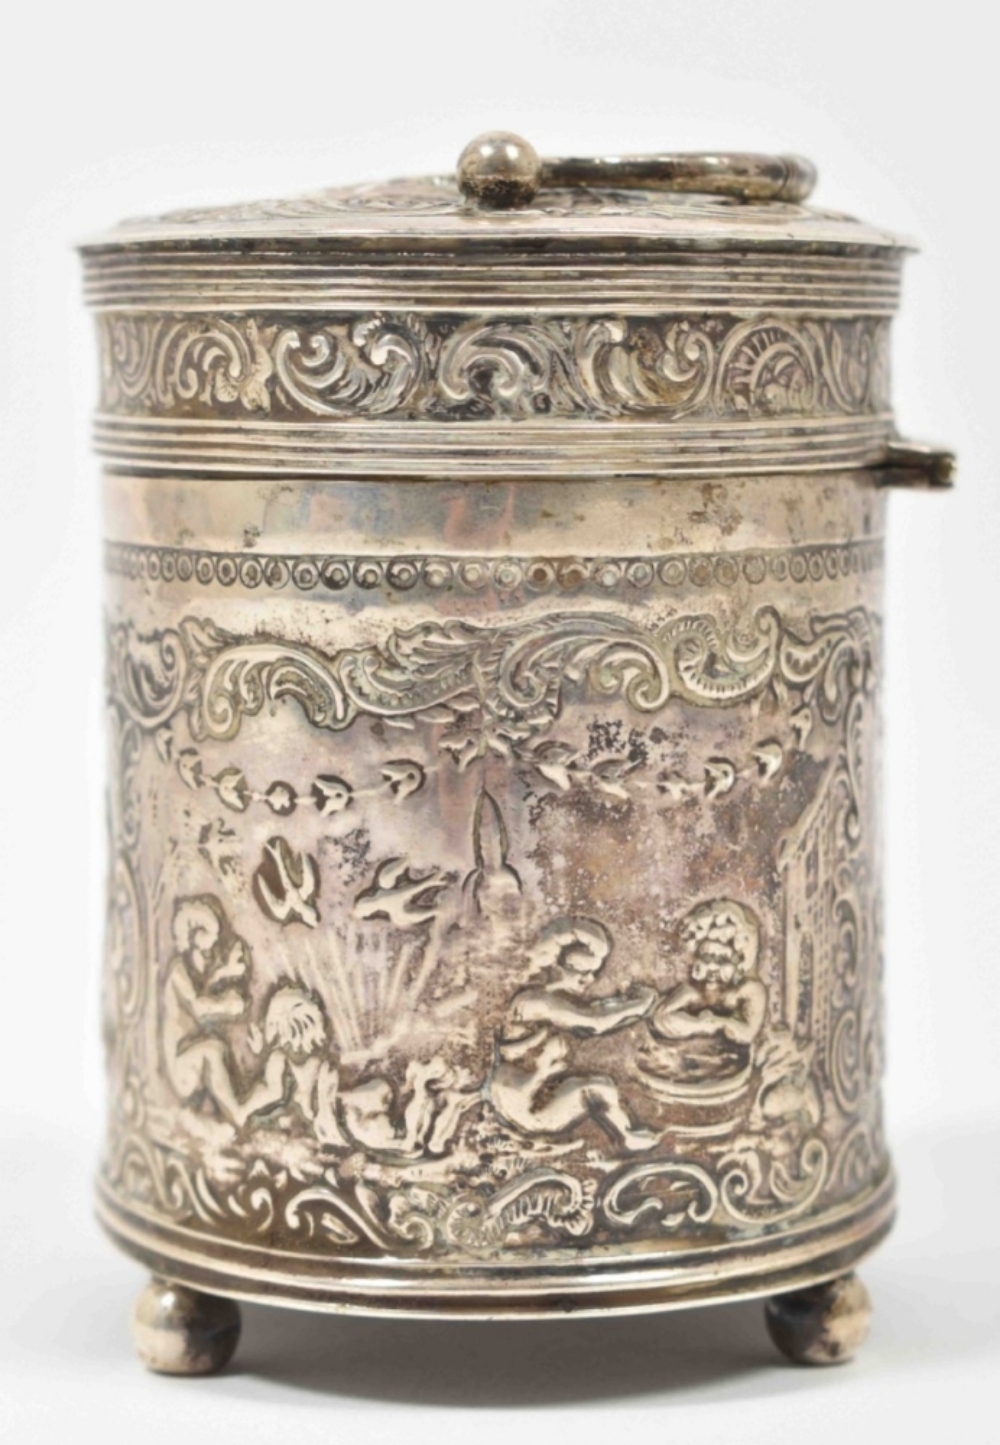 Oval silver tea-caddy - Image 2 of 7